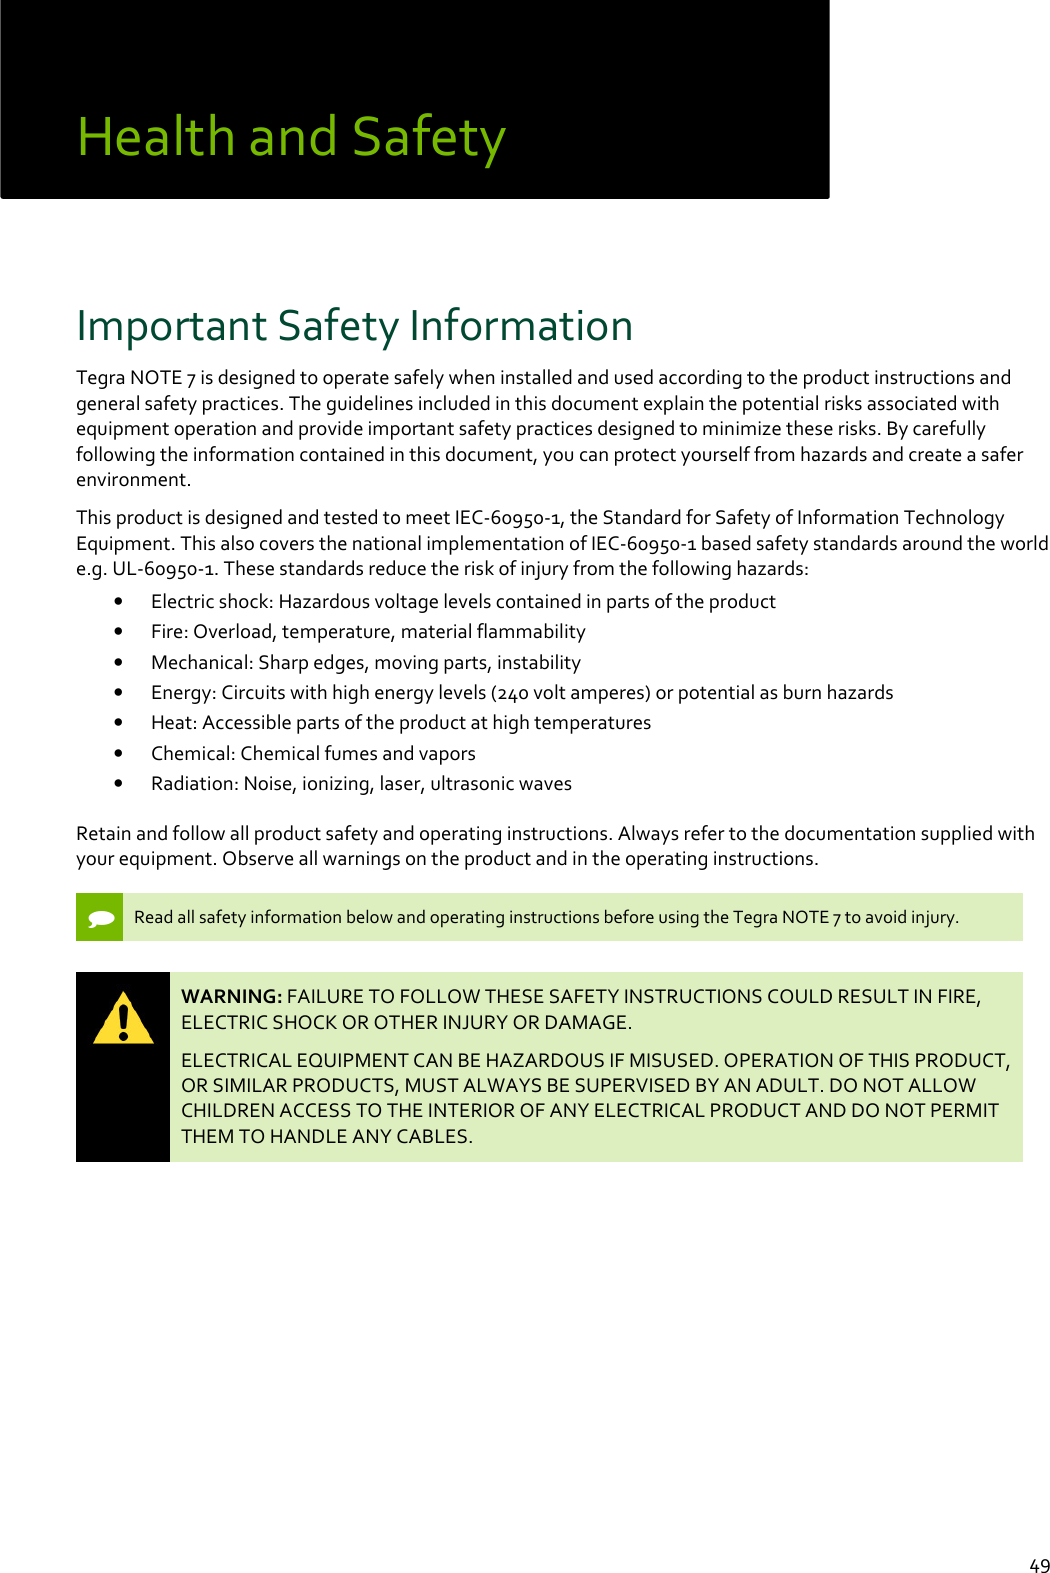  49 Health and Safety  Important Safety Information Tegra NOTE 7 is designed to operate safely when installed and used according to the product instructions and general safety practices. The guidelines included in this document explain the potential risks associated with equipment operation and provide important safety practices designed to minimize these risks. By carefully following the information contained in this document, you can protect yourself from hazards and create a safer environment.  This product is designed and tested to meet IEC-60950-1, the Standard for Safety of Information Technology Equipment. This also covers the national implementation of IEC-60950-1 based safety standards around the world e.g. UL-60950-1. These standards reduce the risk of injury from the following hazards: • Electric shock: Hazardous voltage levels contained in parts of the product • Fire: Overload, temperature, material flammability • Mechanical: Sharp edges, moving parts, instability • Energy: Circuits with high energy levels (240 volt amperes) or potential as burn hazards • Heat: Accessible parts of the product at high temperatures • Chemical: Chemical fumes and vapors • Radiation: Noise, ionizing, laser, ultrasonic waves Retain and follow all product safety and operating instructions. Always refer to the documentation supplied with your equipment. Observe all warnings on the product and in the operating instructions.    Read all safety information below and operating instructions before using the Tegra NOTE 7 to avoid injury.    WARNING: FAILURE TO FOLLOW THESE SAFETY INSTRUCTIONS COULD RESULT IN FIRE, ELECTRIC SHOCK OR OTHER INJURY OR DAMAGE.  ELECTRICAL EQUIPMENT CAN BE HAZARDOUS IF MISUSED. OPERATION OF THIS PRODUCT, OR SIMILAR PRODUCTS, MUST ALWAYS BE SUPERVISED BY AN ADULT. DO NOT ALLOW CHILDREN ACCESS TO THE INTERIOR OF ANY ELECTRICAL PRODUCT AND DO NOT PERMIT THEM TO HANDLE ANY CABLES.     